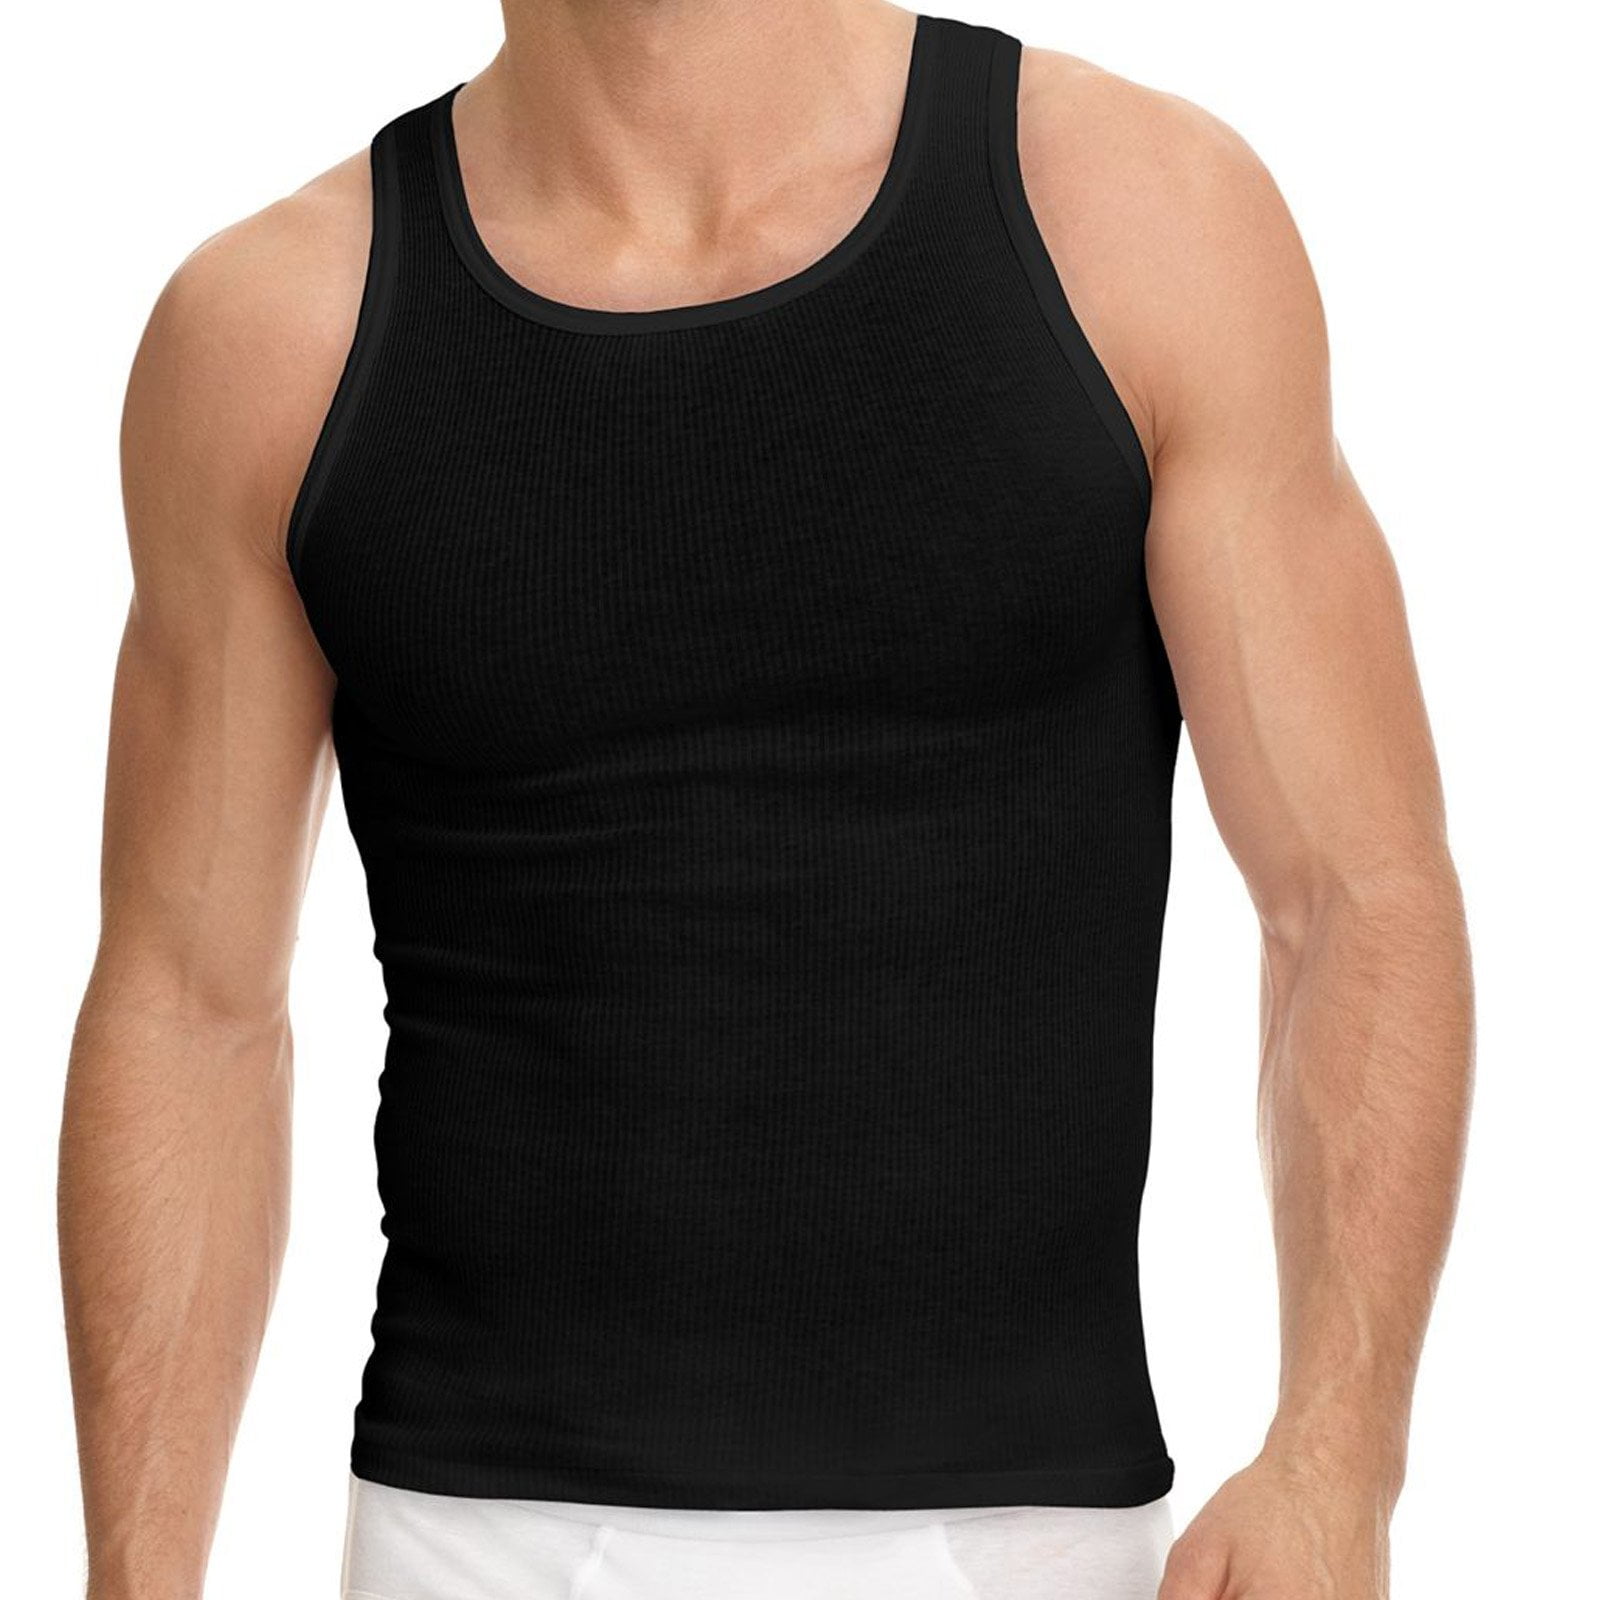 pictures of a wife beater